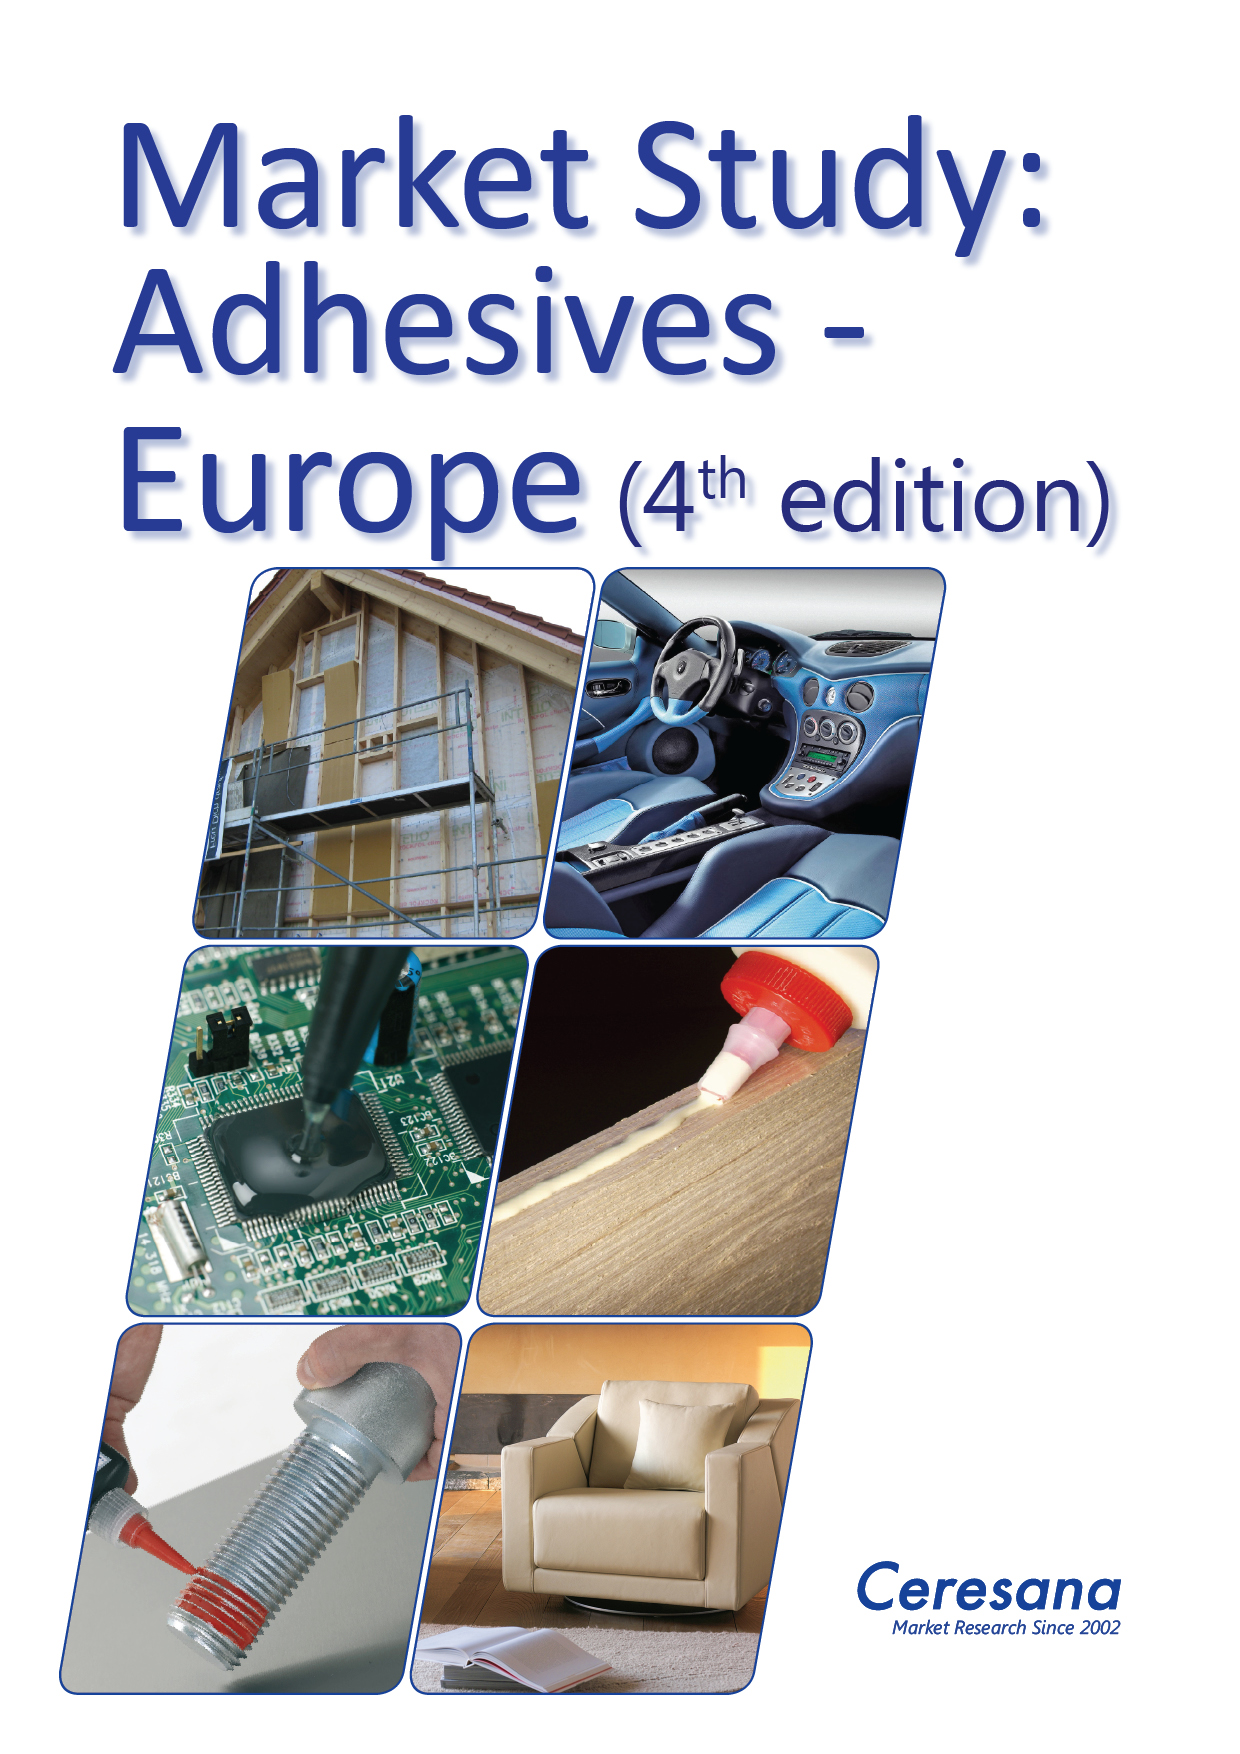 Connecting Old and New: Ceresana Examines the European Market for Adhesives